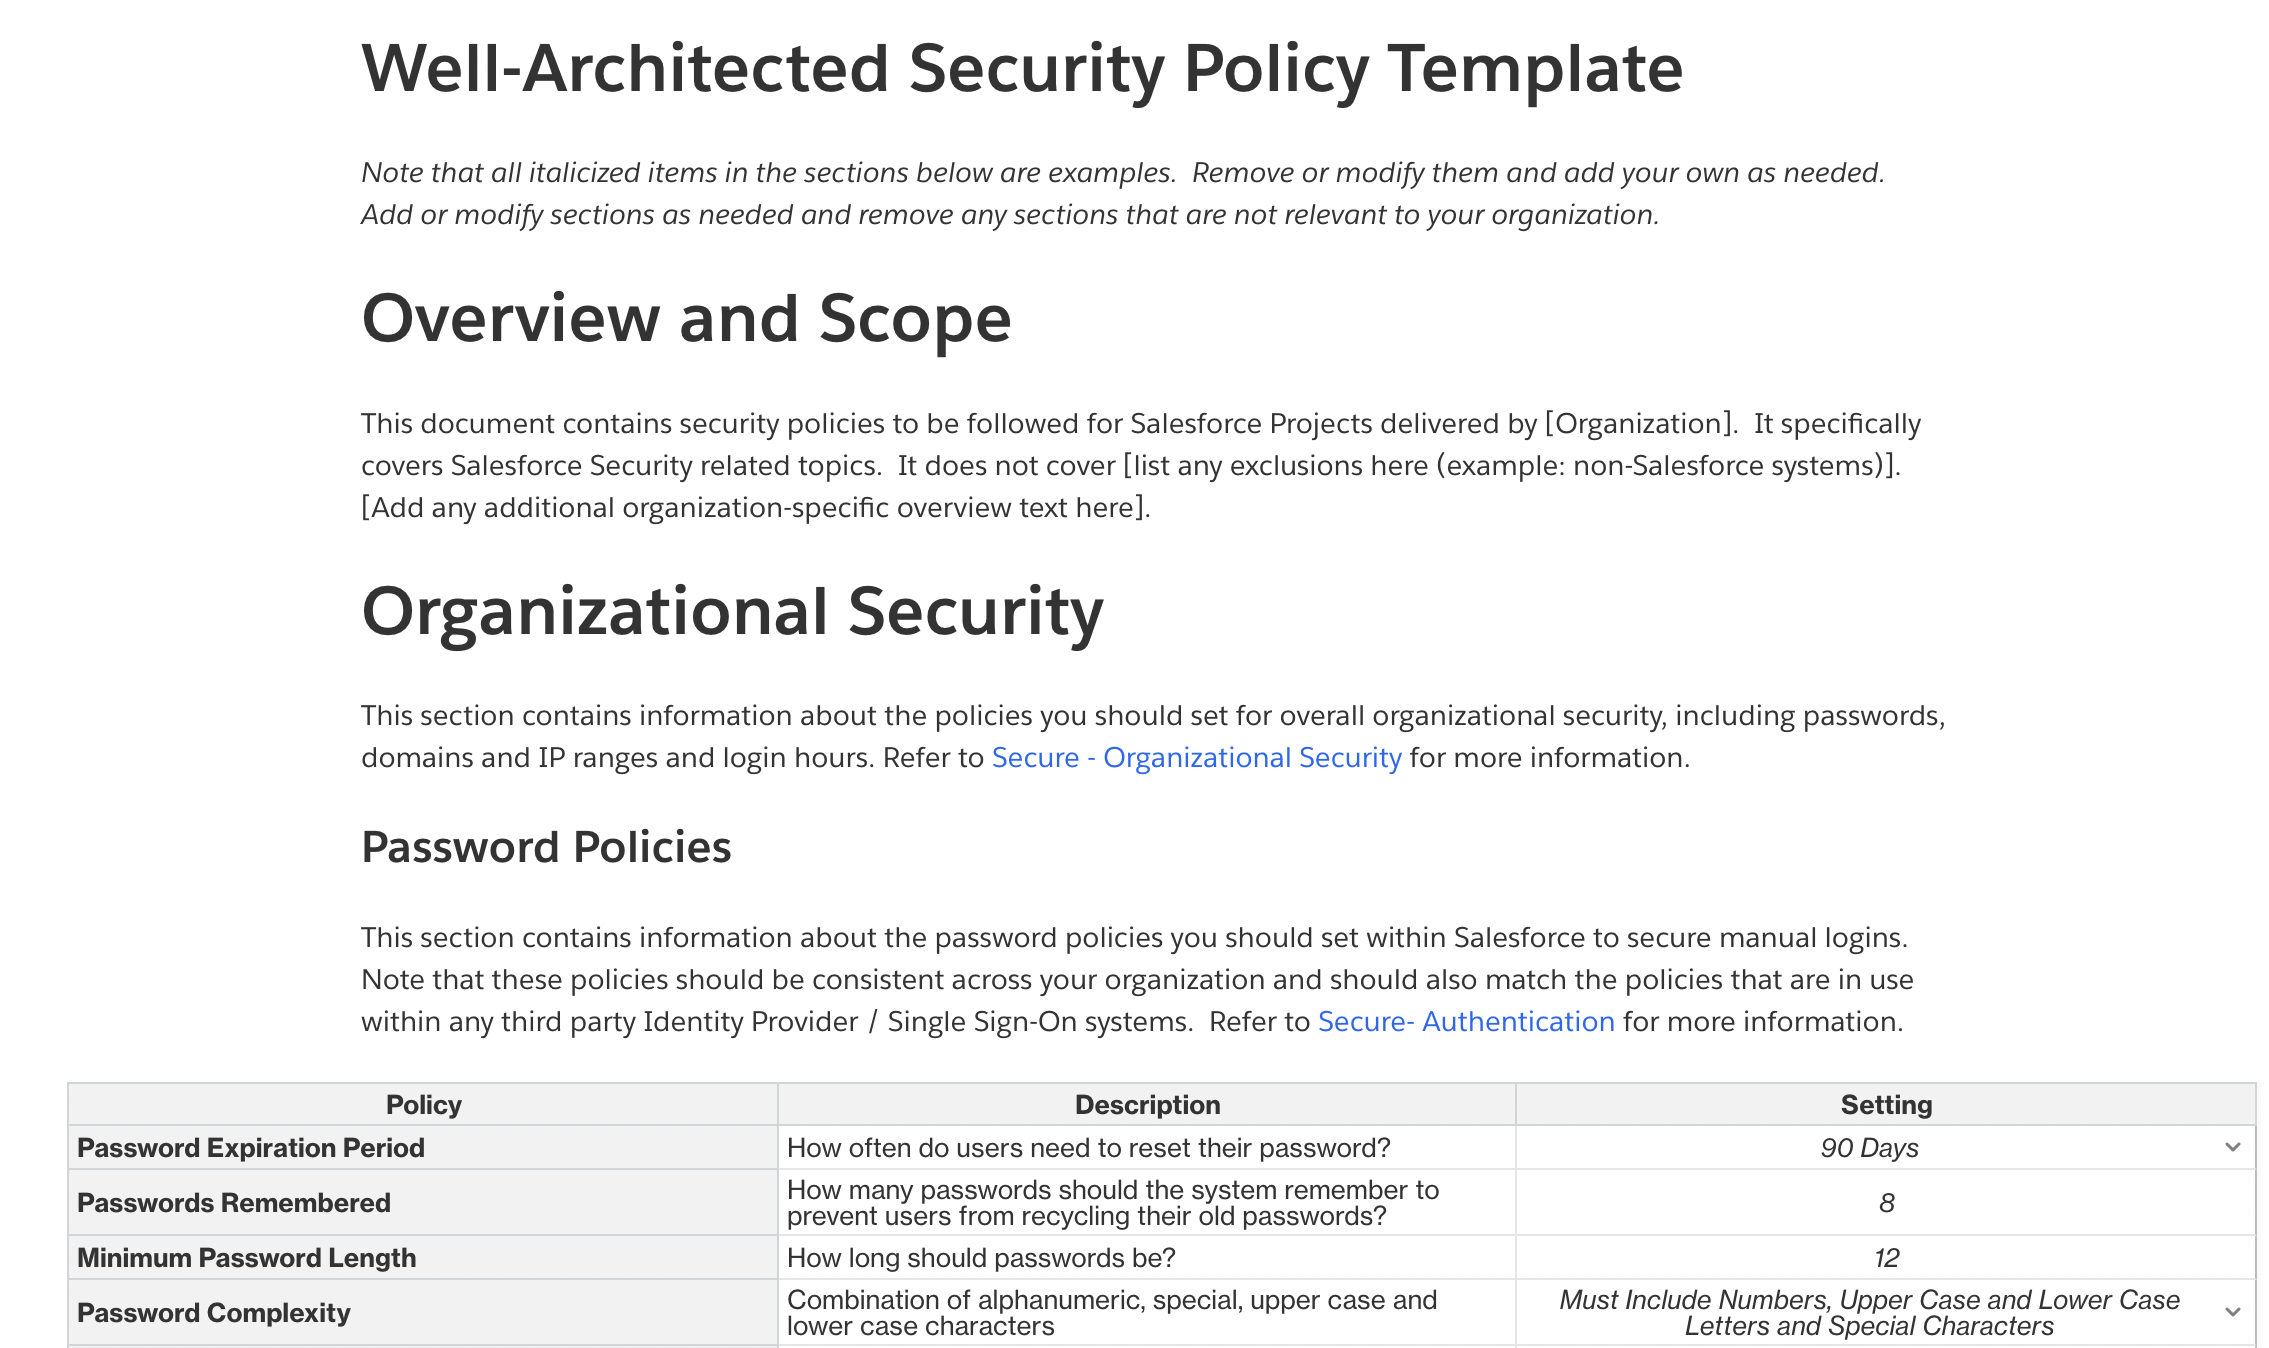 Use this template to set security policies for your organization.